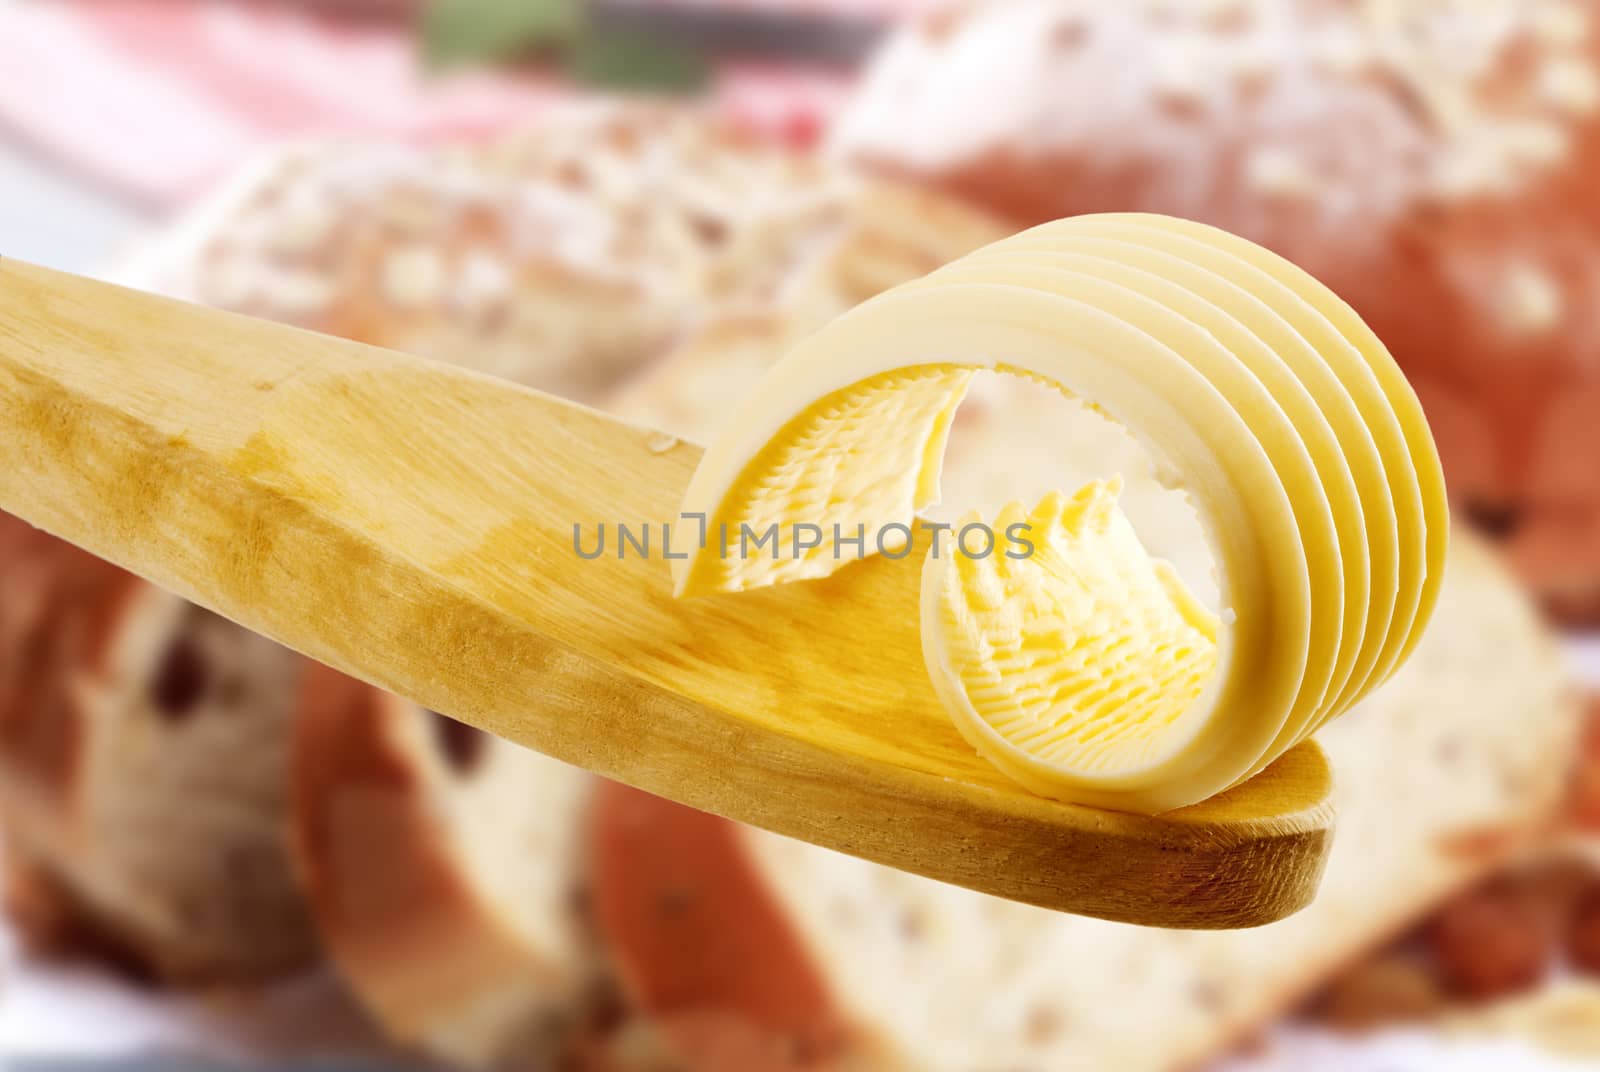 Butter curl on a wooden spoon, baked products in the background